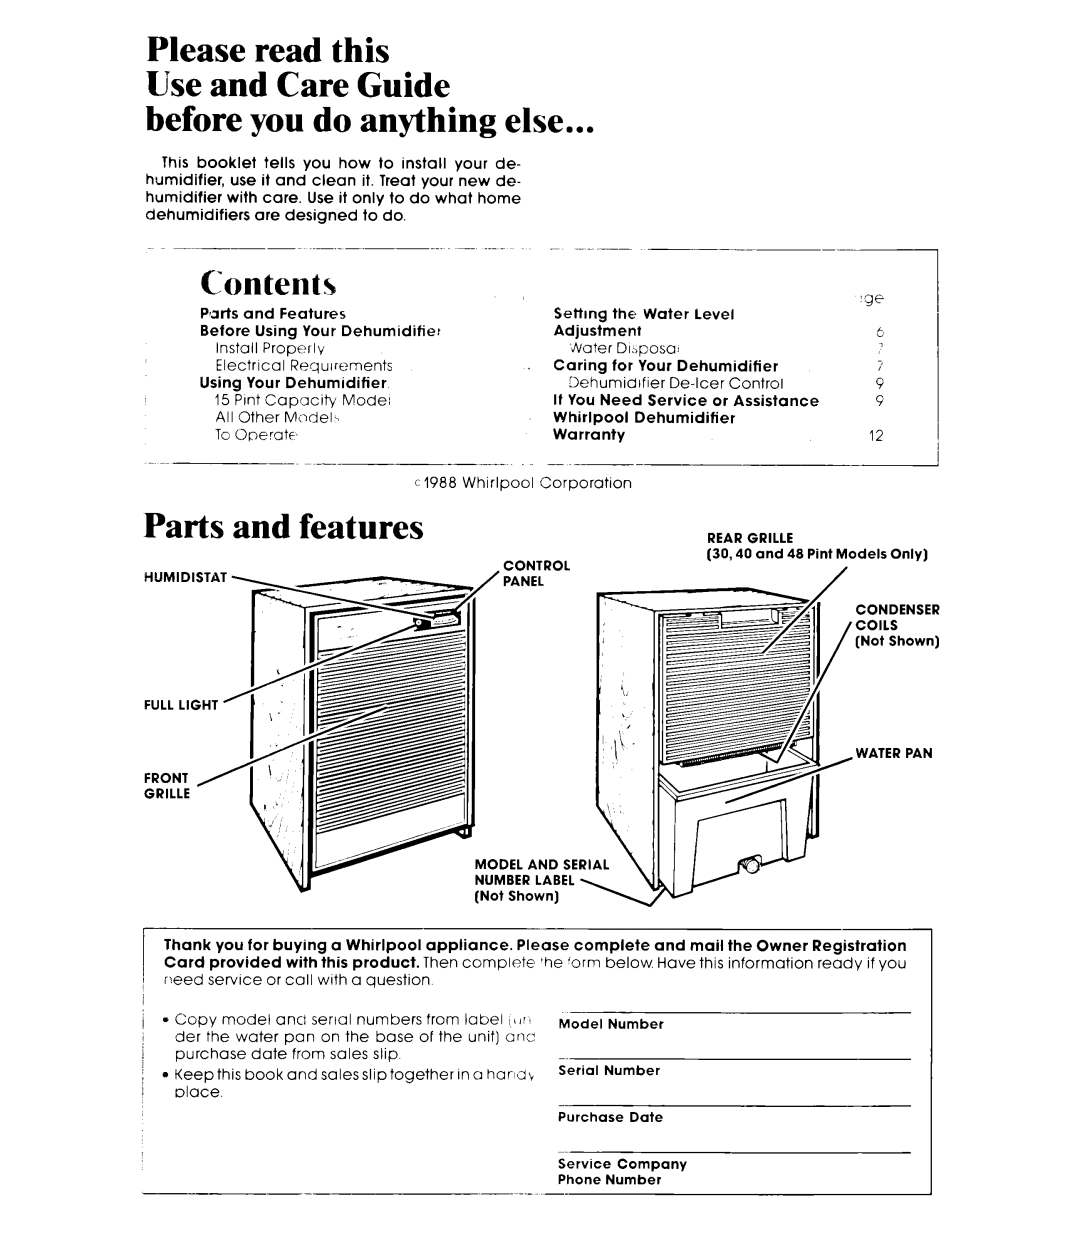 Whirlpool AD0402XS0 manual before you do anything else, Parts and features, Content, Please read this Use and Care Guide 